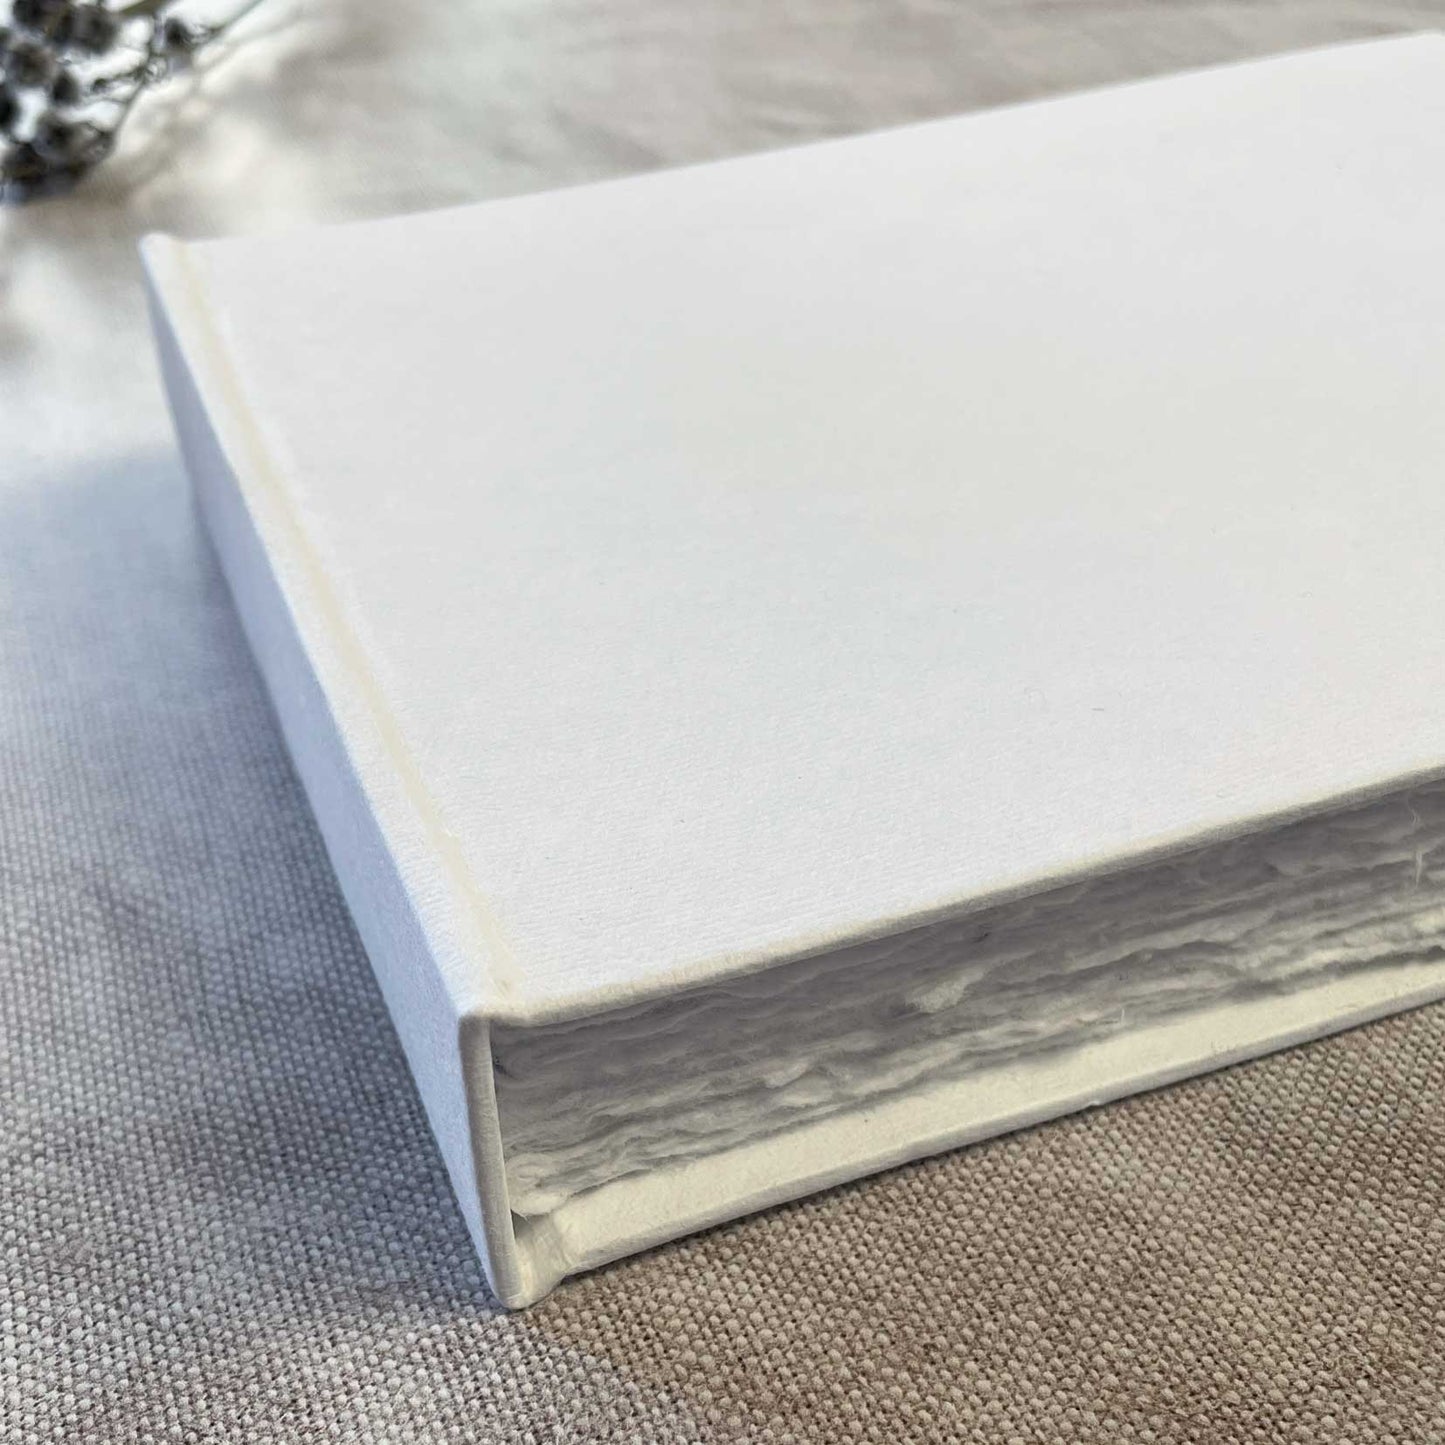 handmade white blank journal with 100 bound pages of recycled cotton rag paper